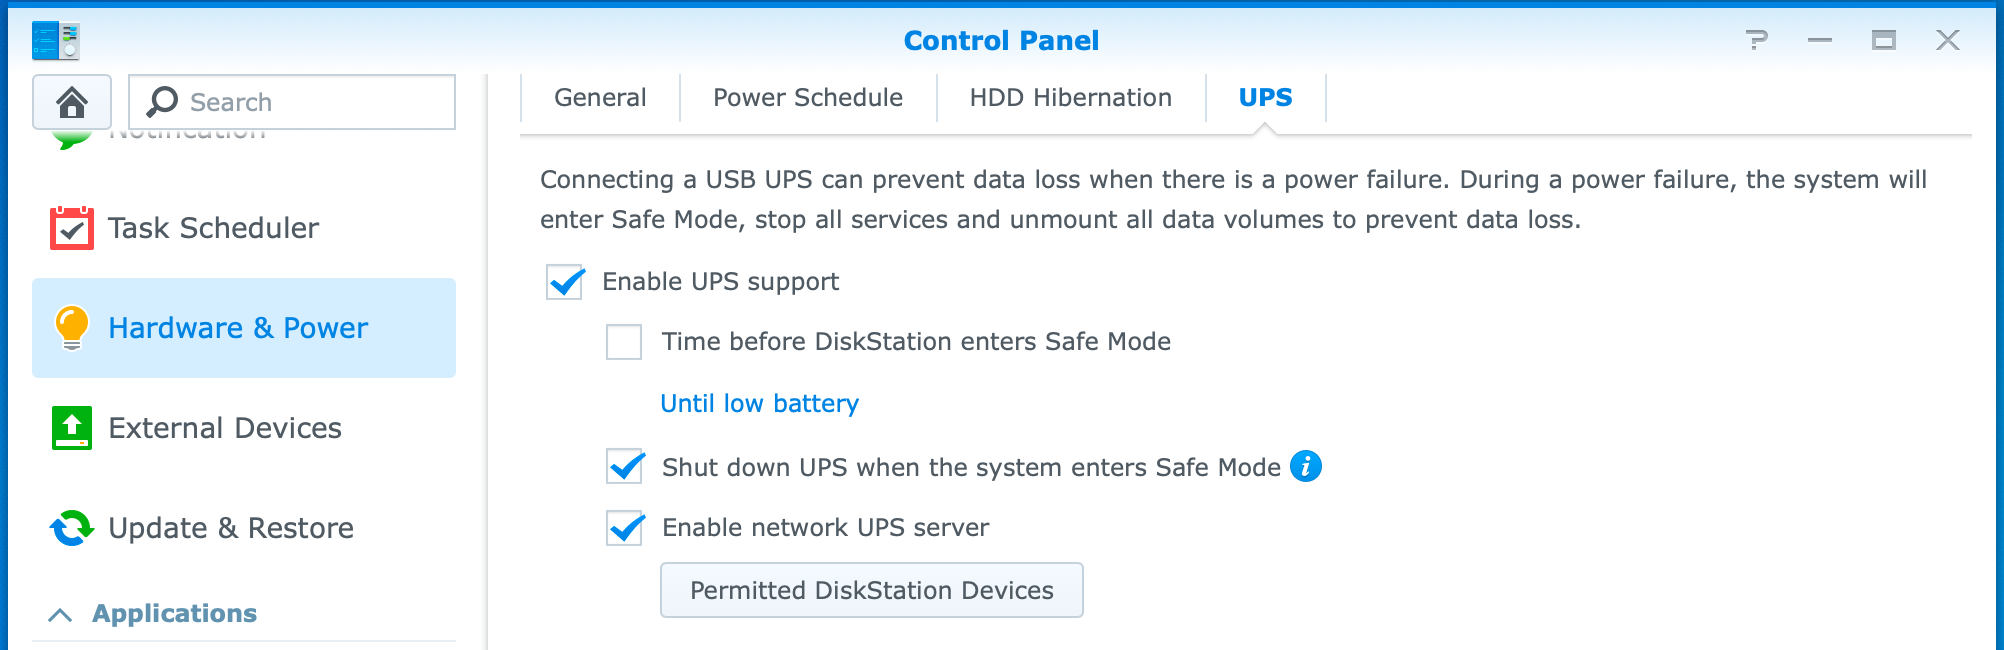 synology, control panel, hardware & power, ups